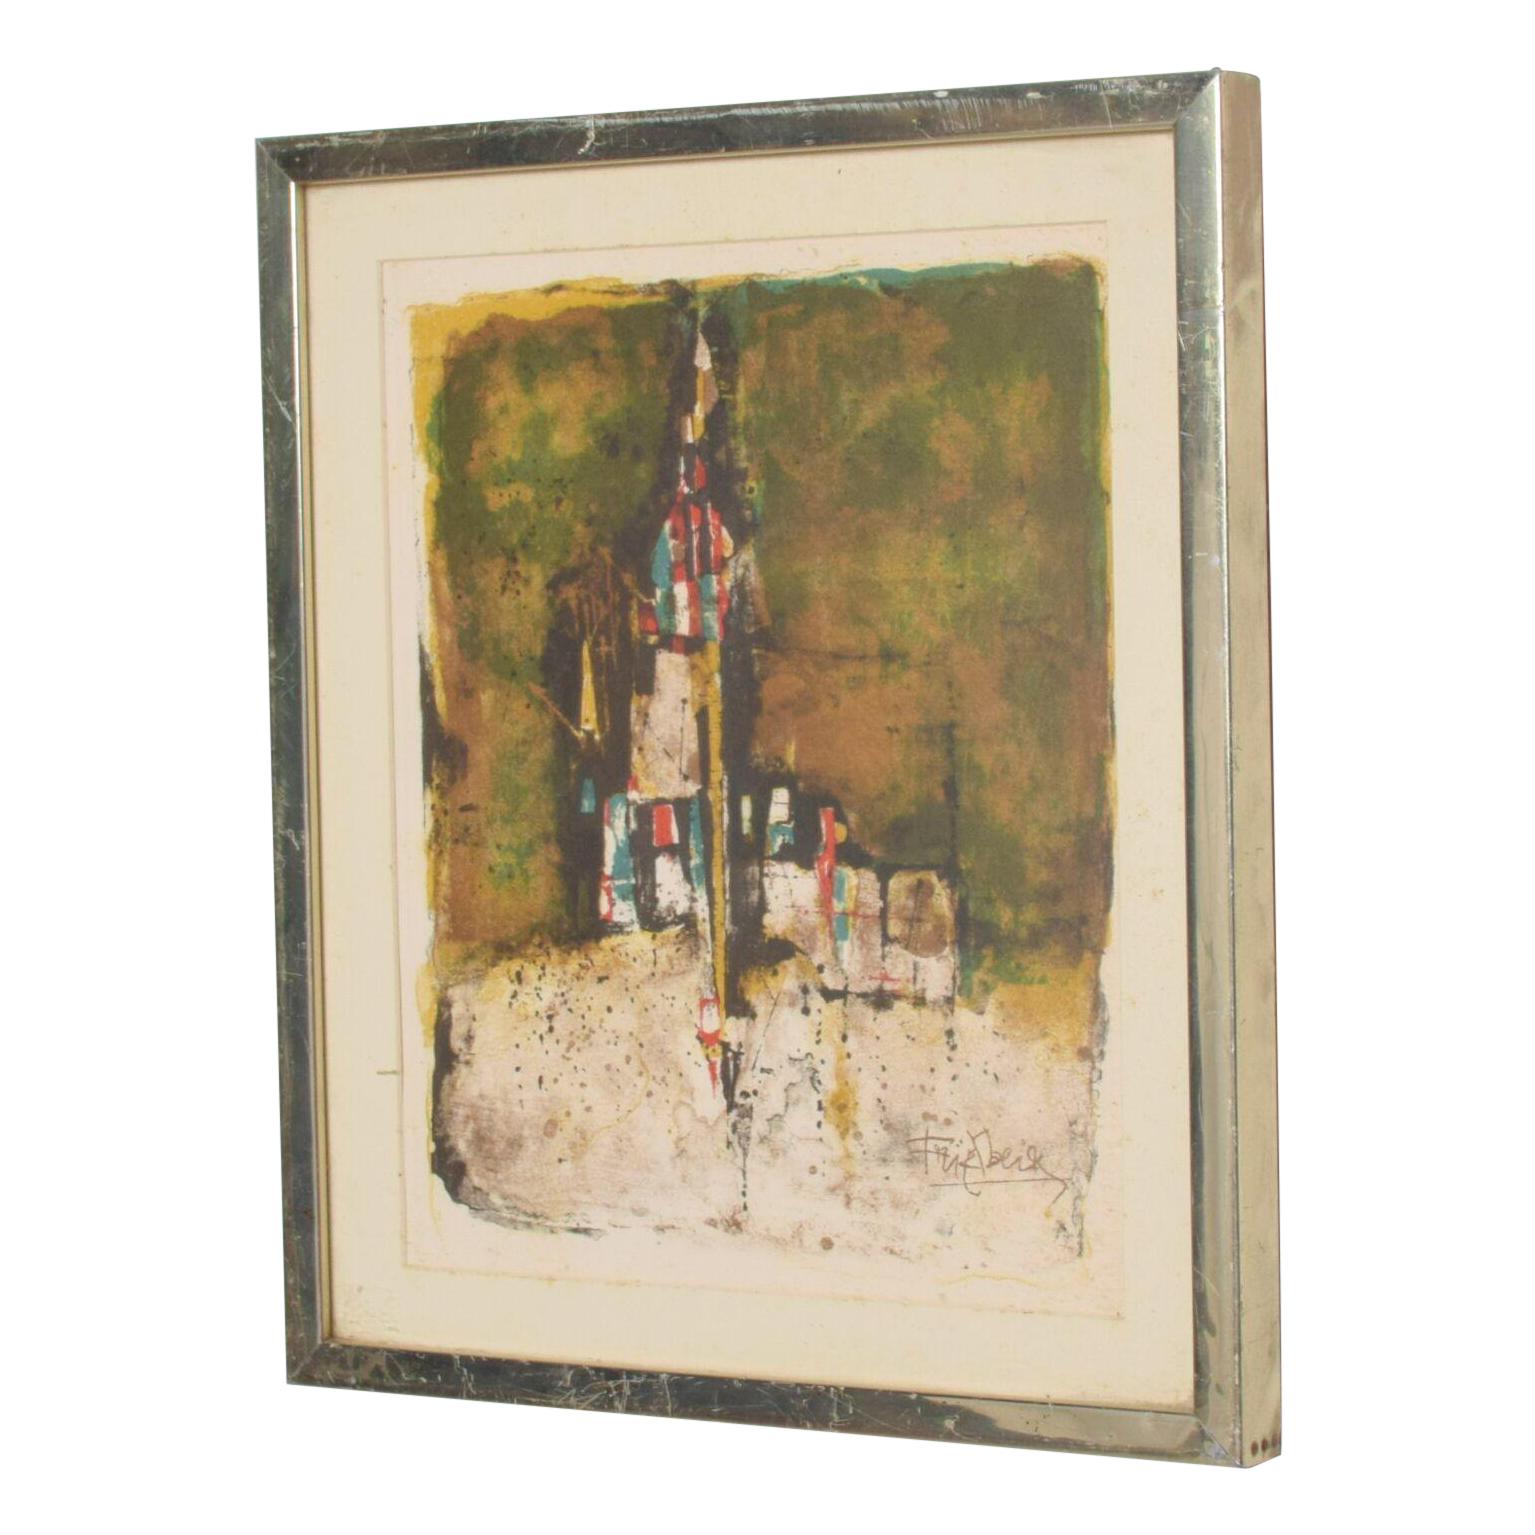 Art
European Scene Lithograph Abstract Landscape
Art is signed bottom right by Johnny Friedlaender
Preowned unrestored vintage condition; shows signs of wear age, mold stains present.
Scratches to the original glass frame.
Dimensions: 14 x 11.5